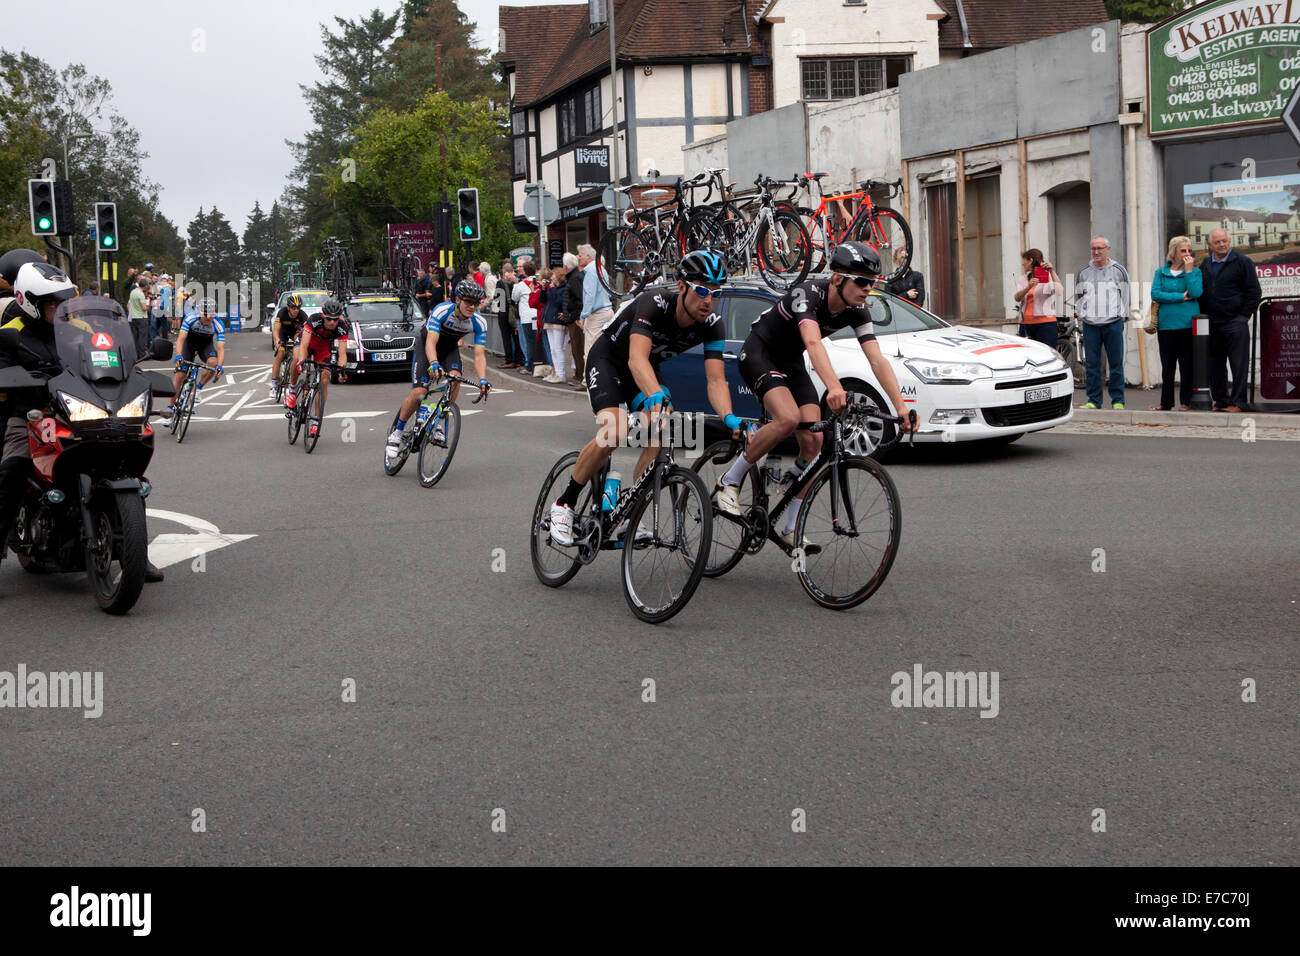 Hindhead, Surrey, UK 13th September 2014. Stage 7 of the Tour of Britain (Camberley to Brighton) passing through the former Hindhead traffic lights crossroads. Stock Photo